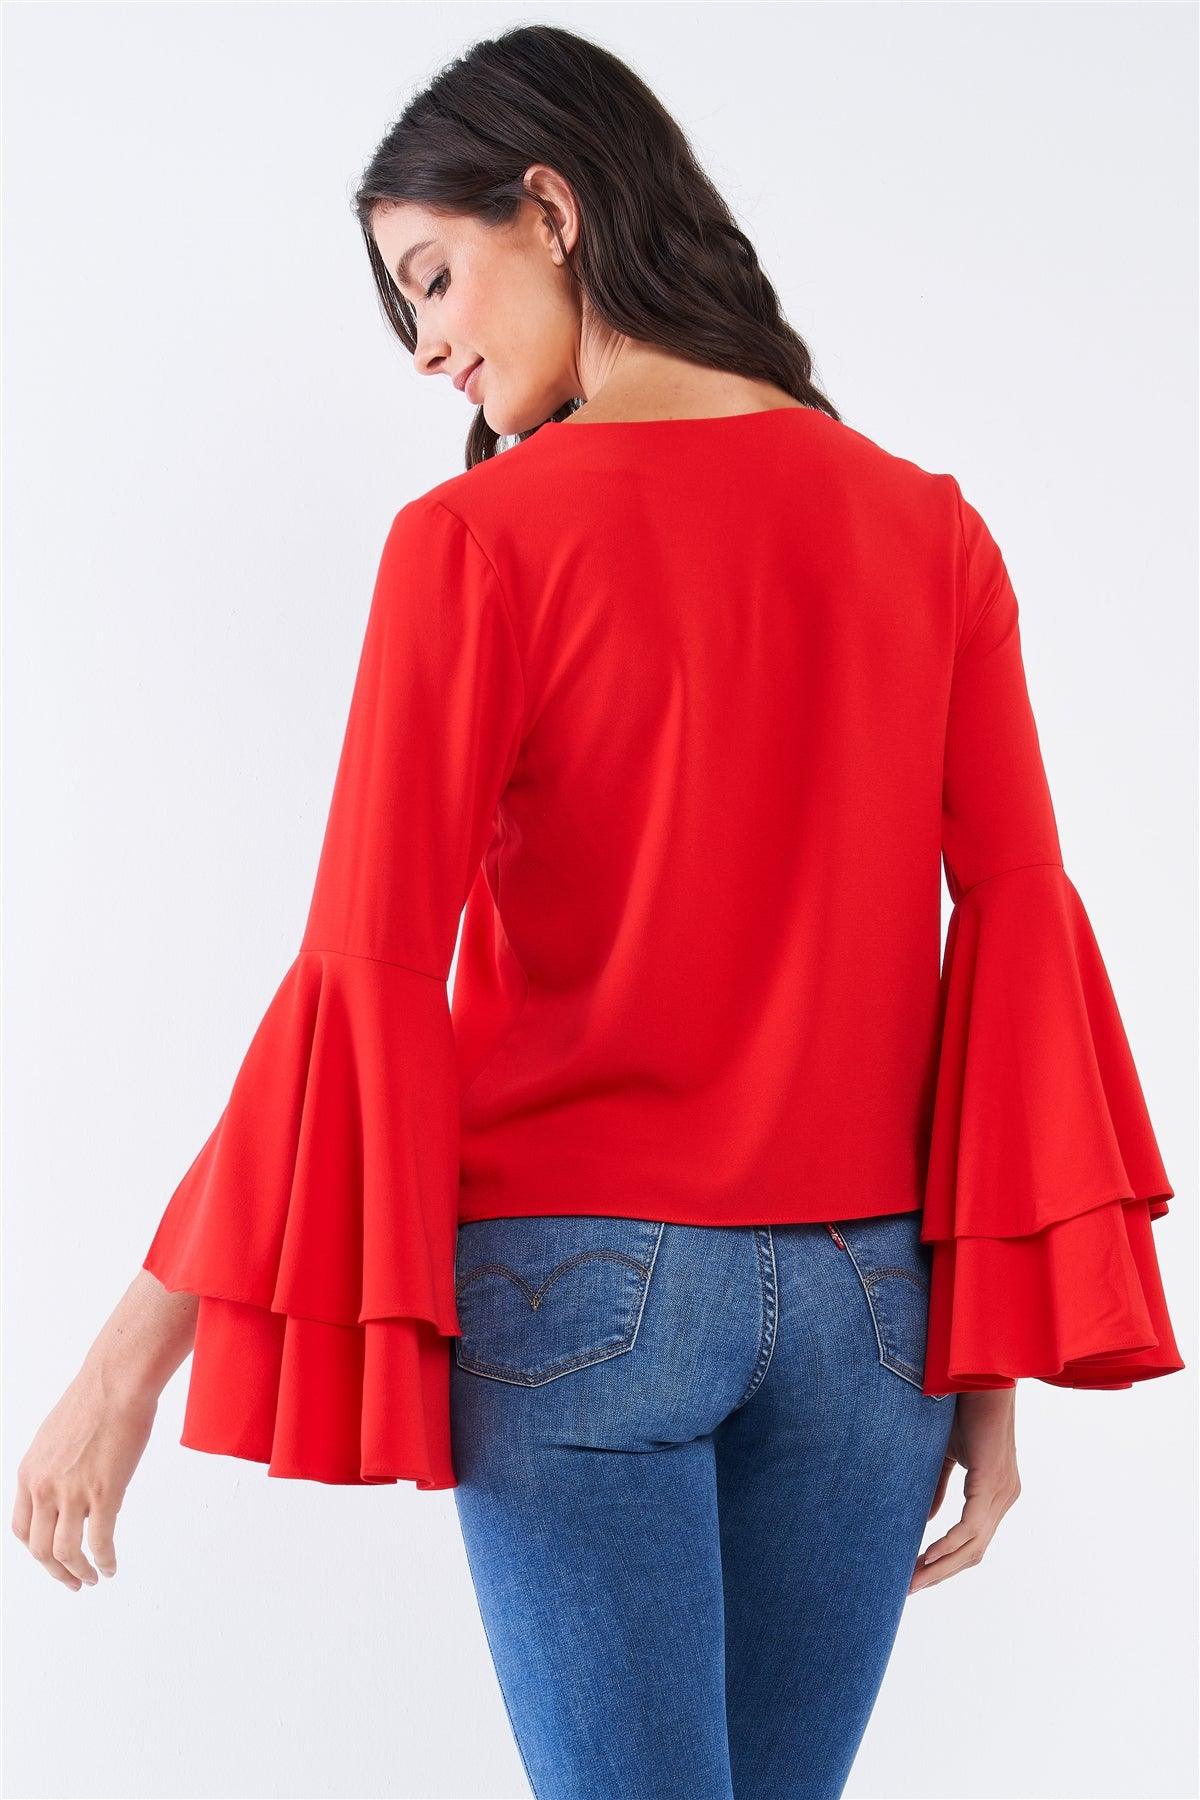 Crimson Red V-Neck Long Bluebell Slit Draw String Tie Double Frill Sleeve Top /3-3